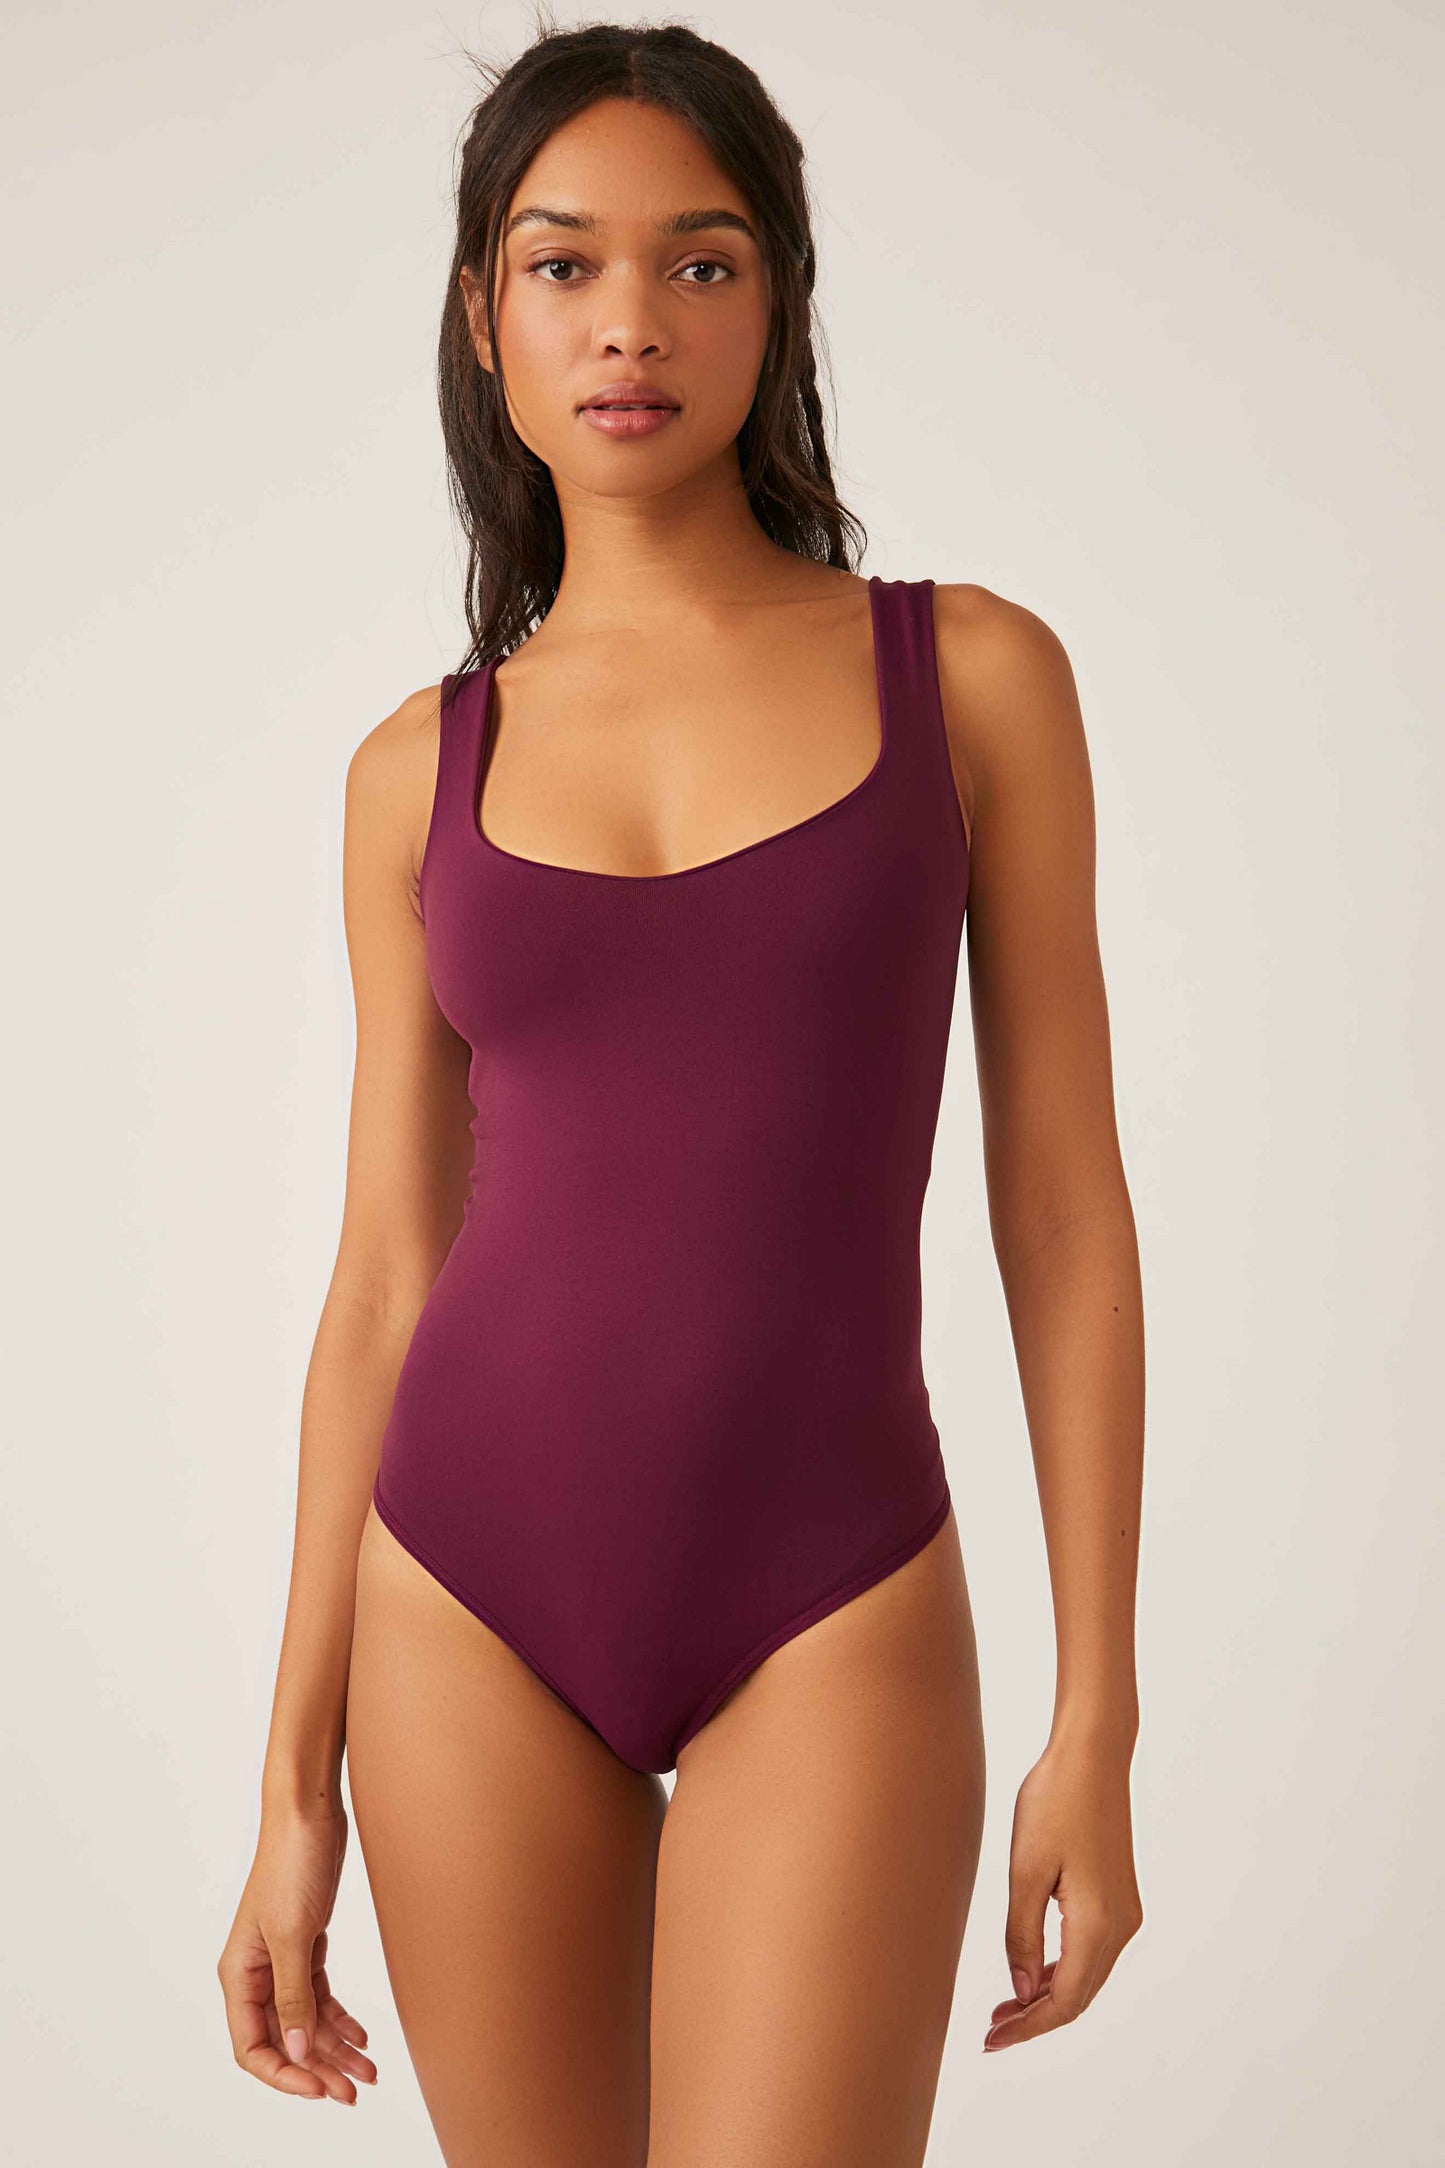 Load image into Gallery viewer, Free People Clean Lines Bodysuit - Precious Wine
